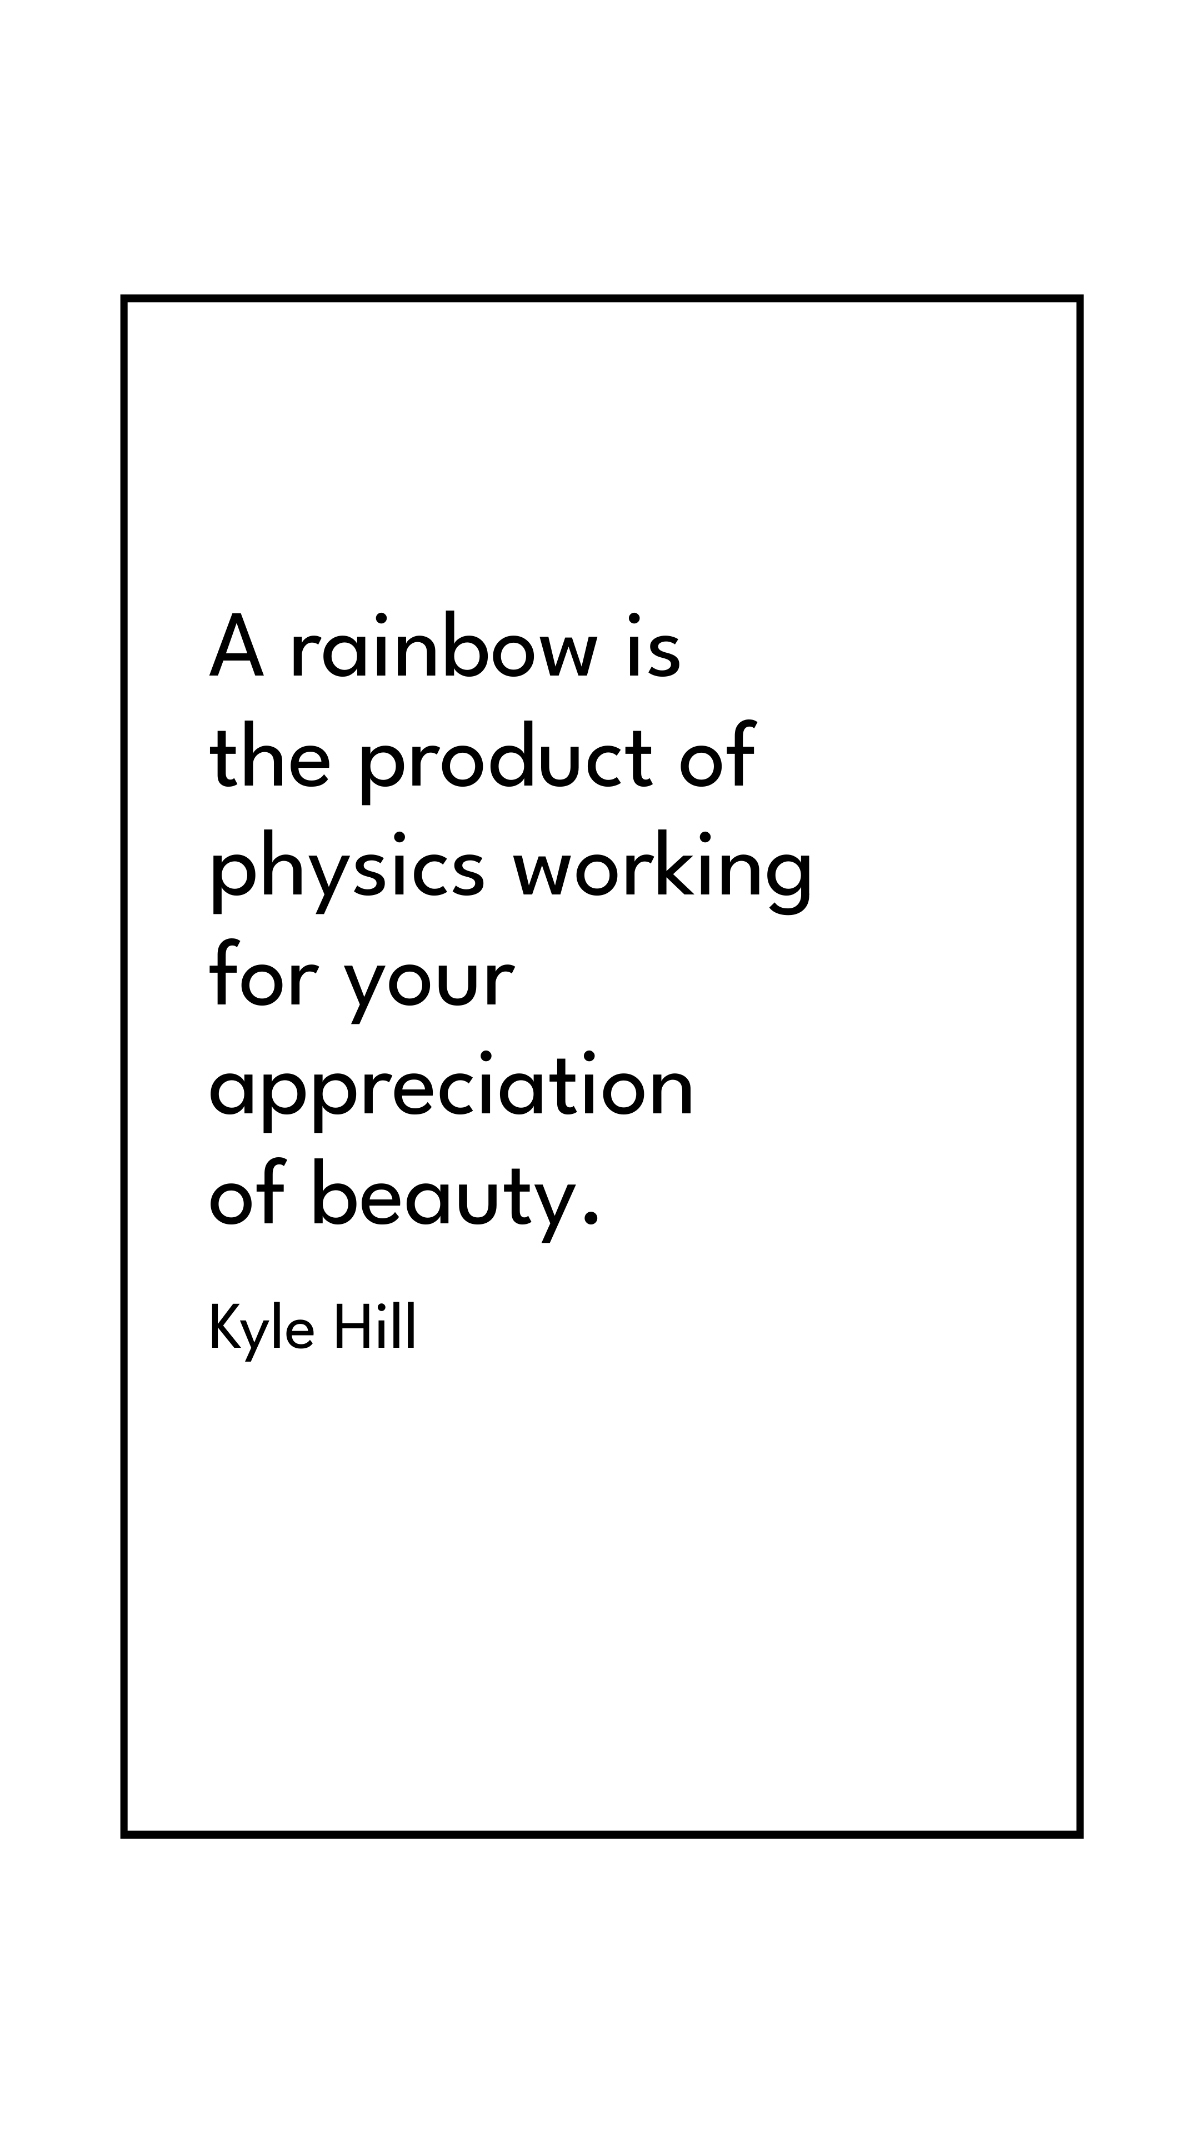 Free Kyle Hill - A rainbow is the product of physics working for your appreciation of beauty. Template